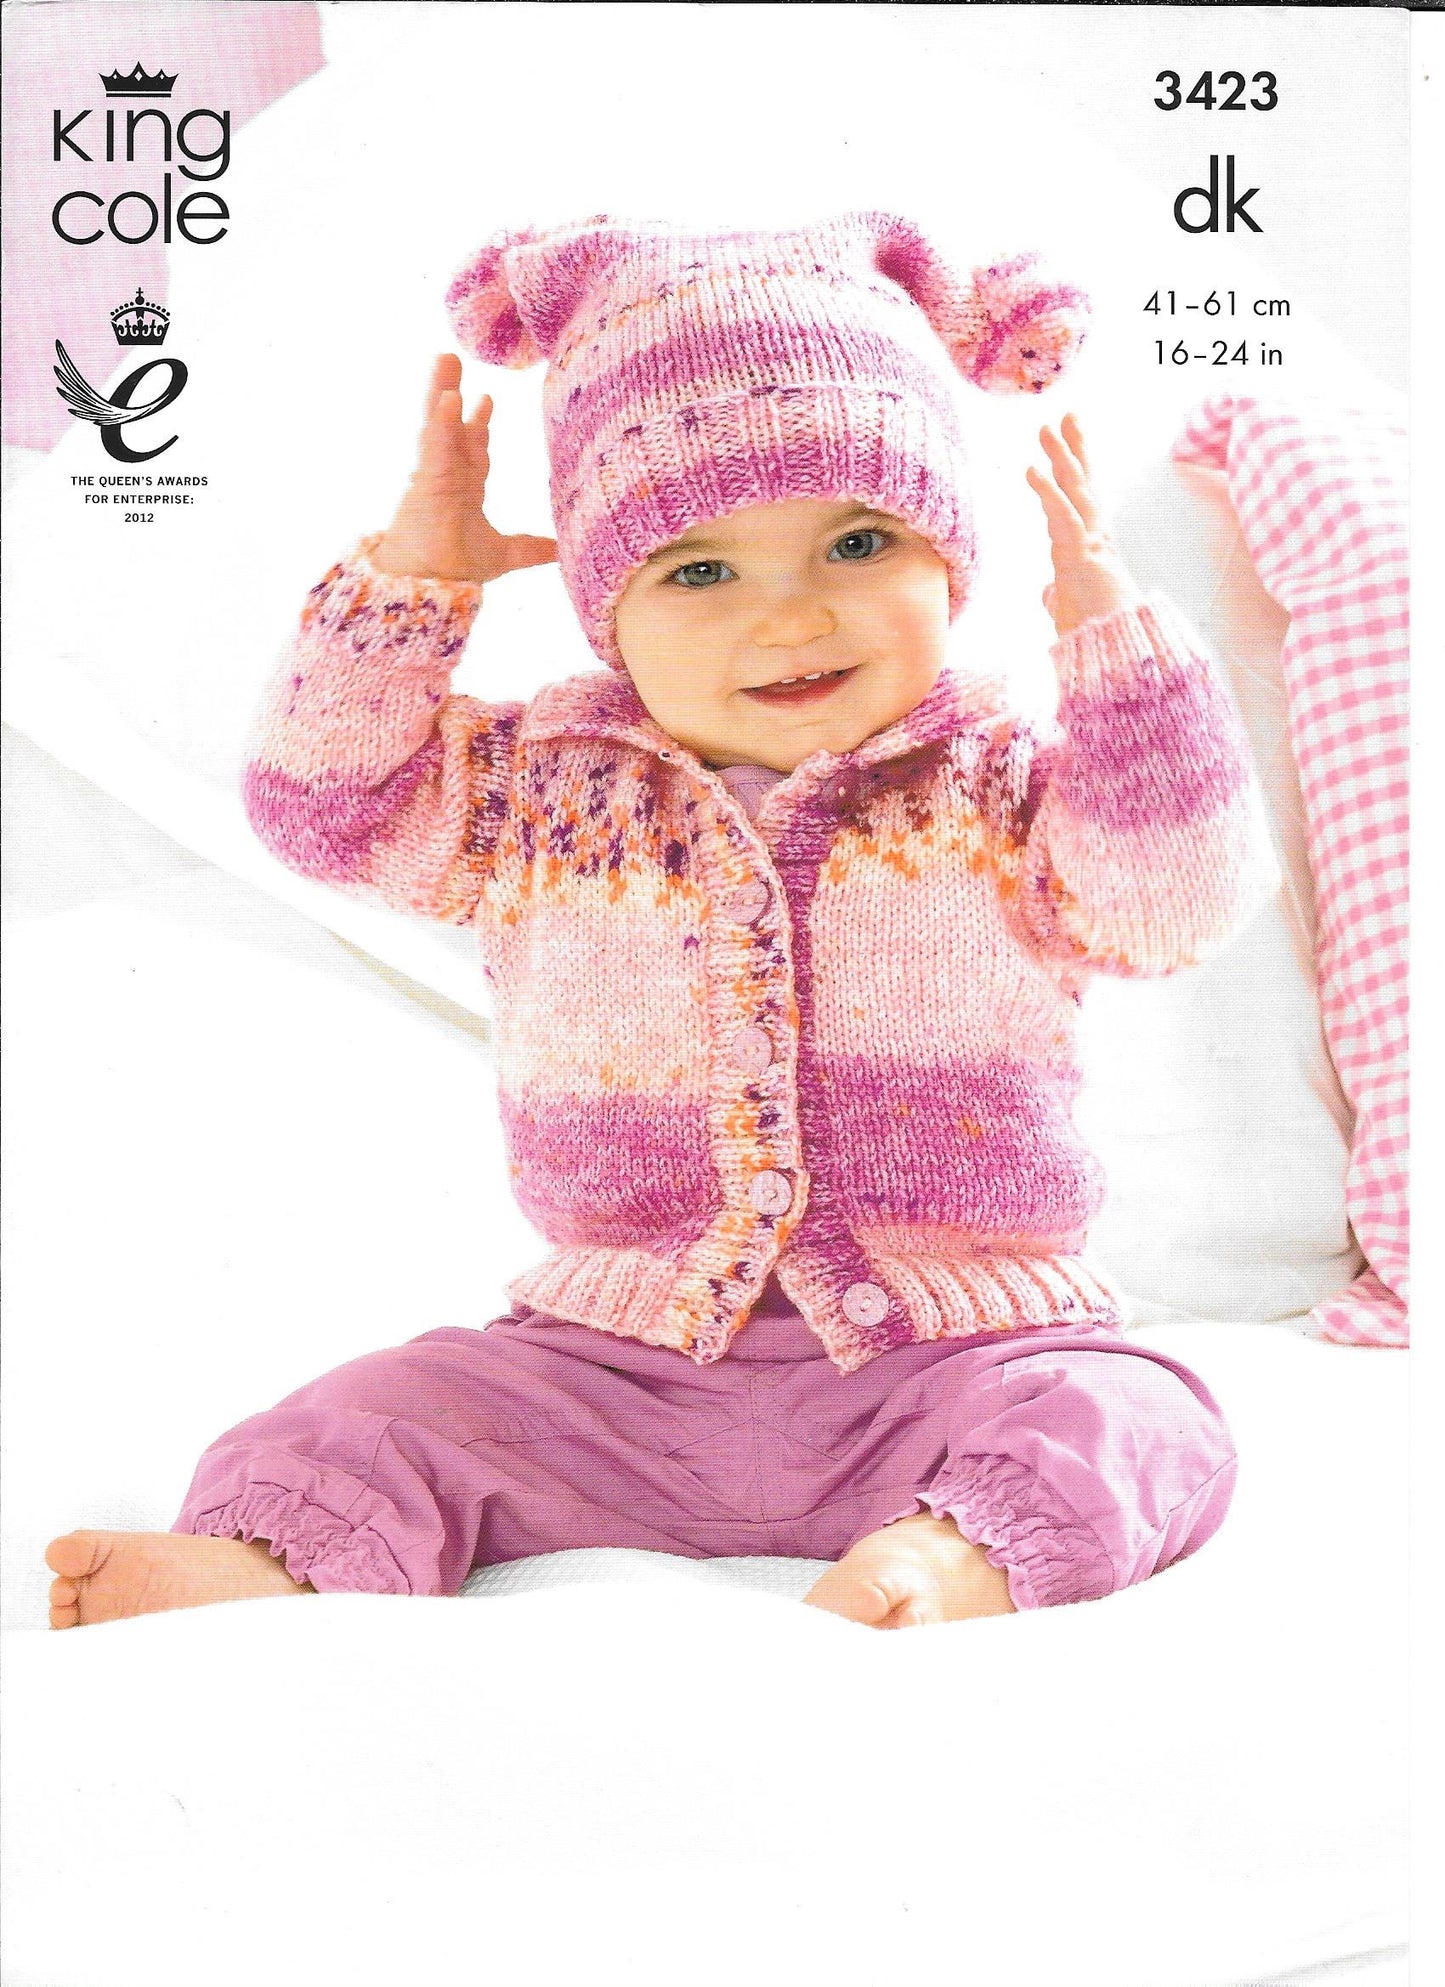 3423 King Cole Dk Splash baby, Child Hooded cardigan, collared cardigan and hat knitting pattern